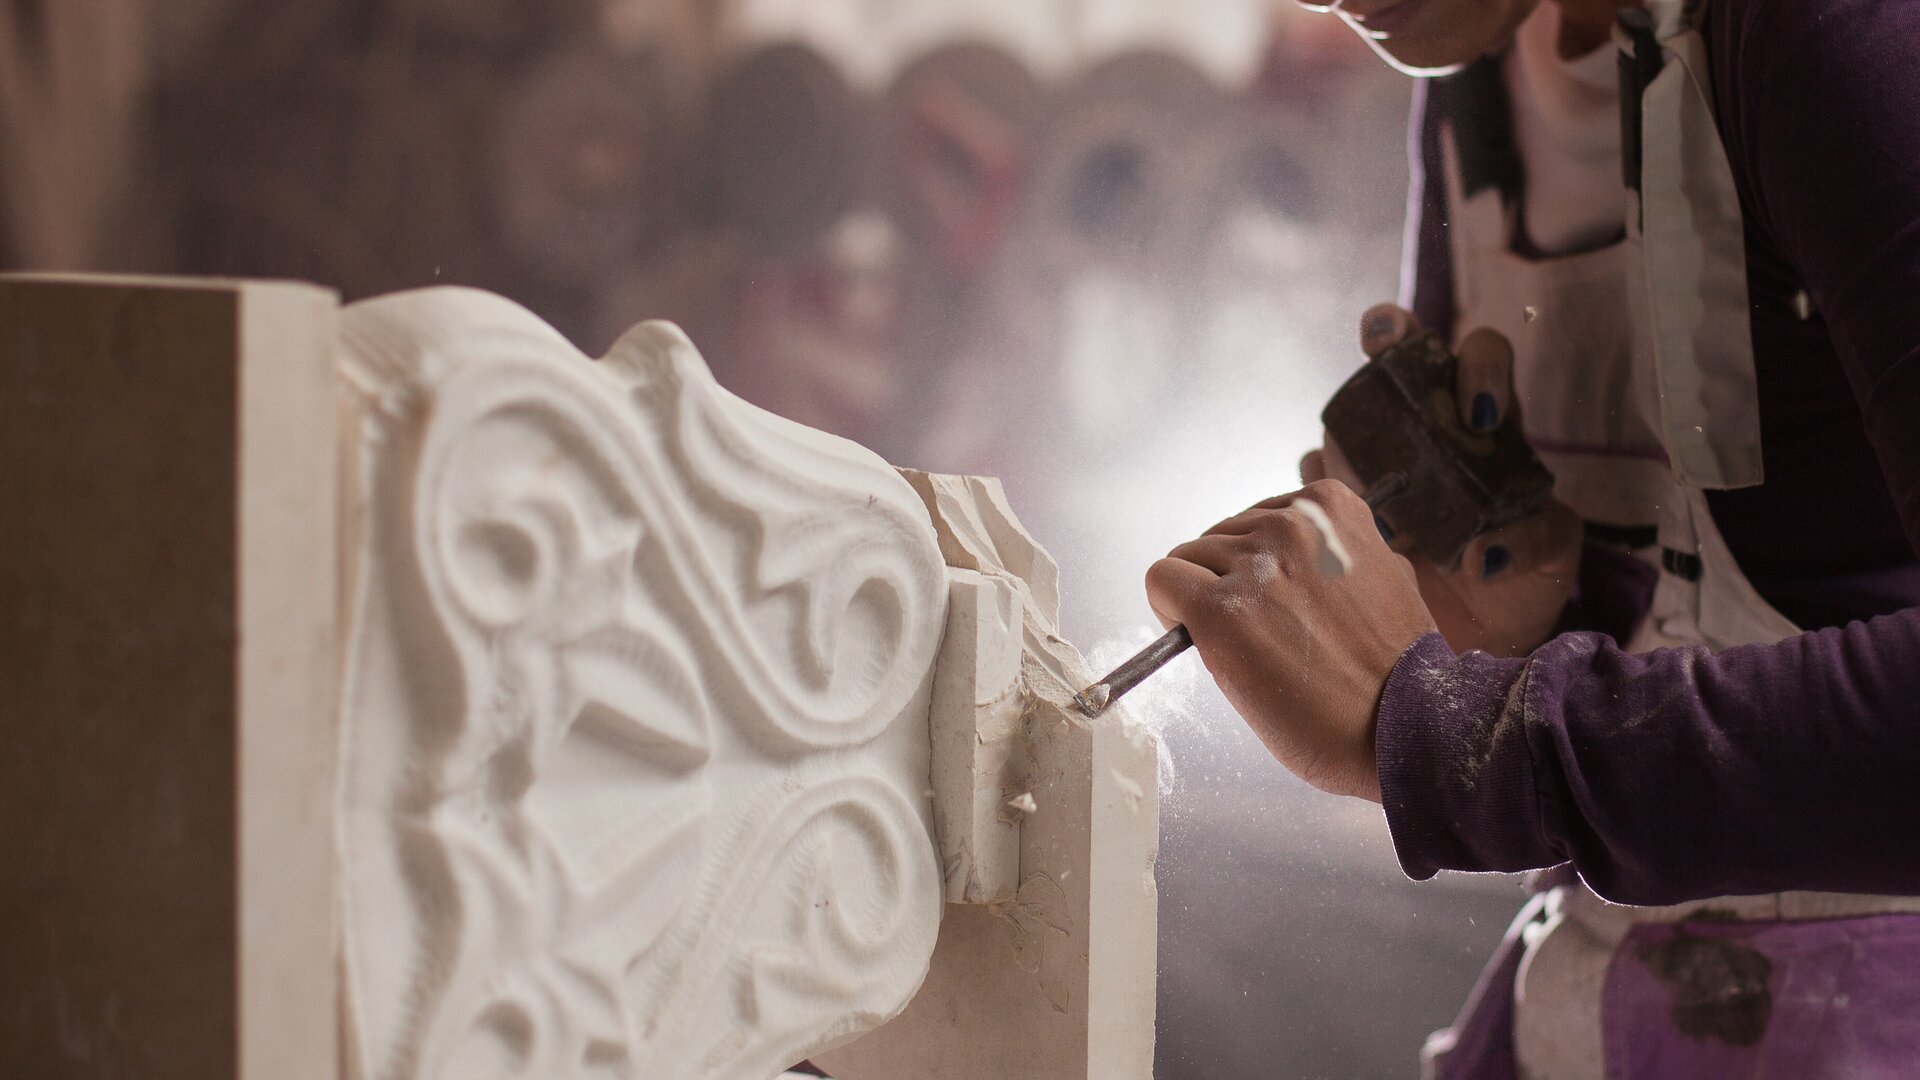 Close-up of a natural stone monument being worked on by a person with a chisel.